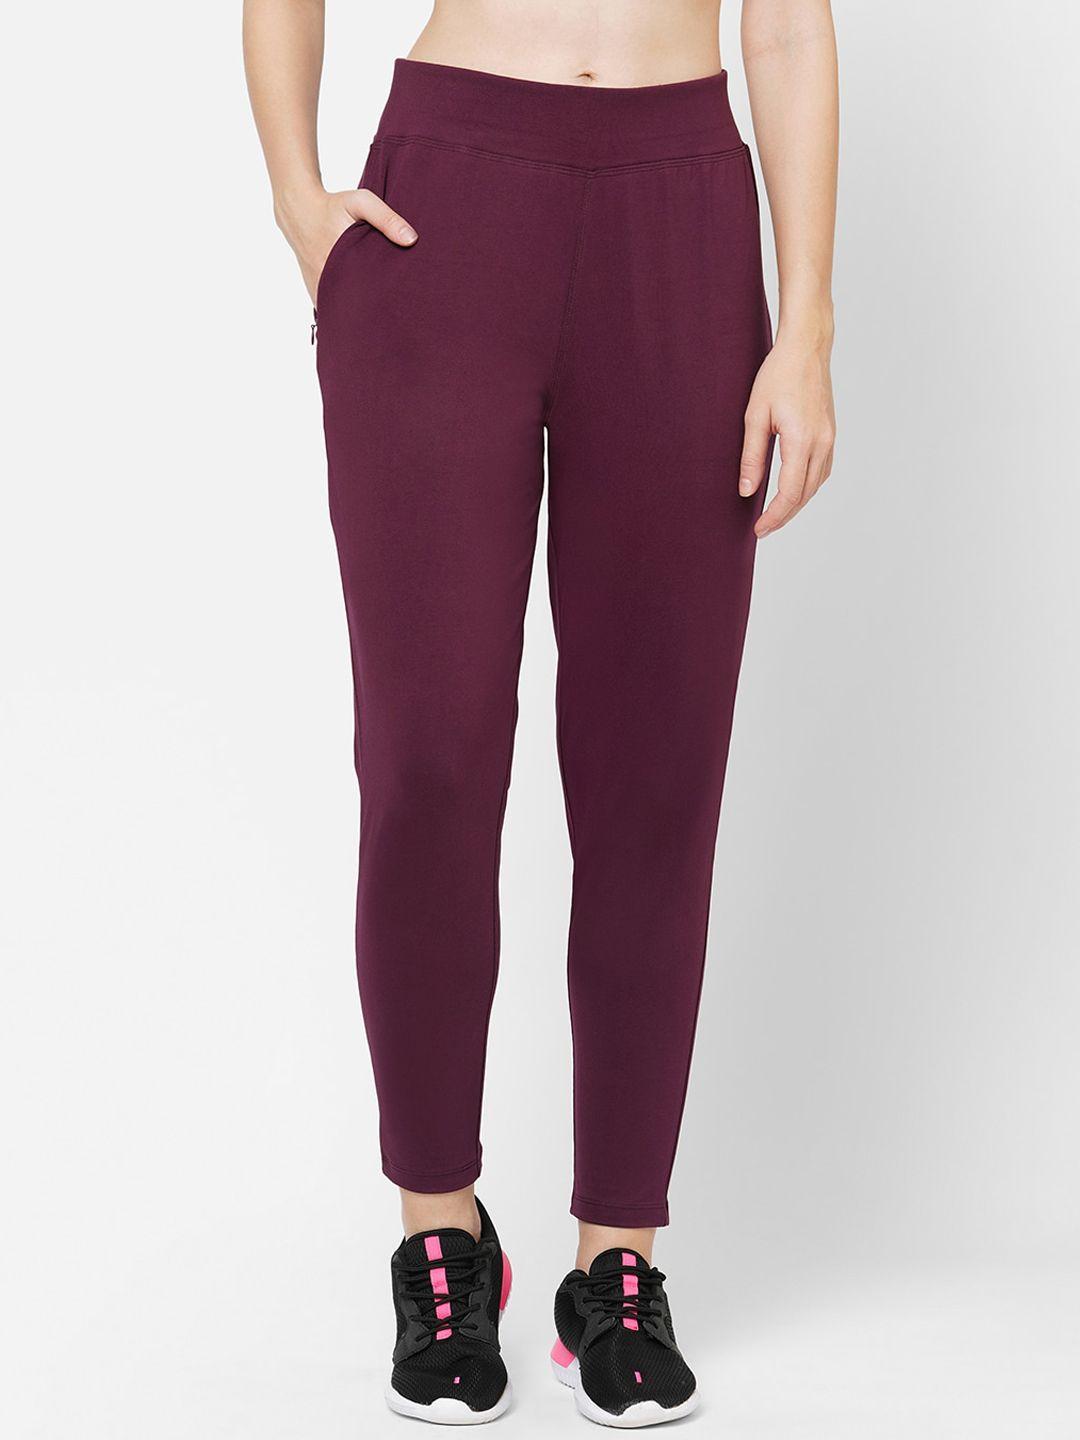 maysixty women maroon solid slim-fit cotton track pants